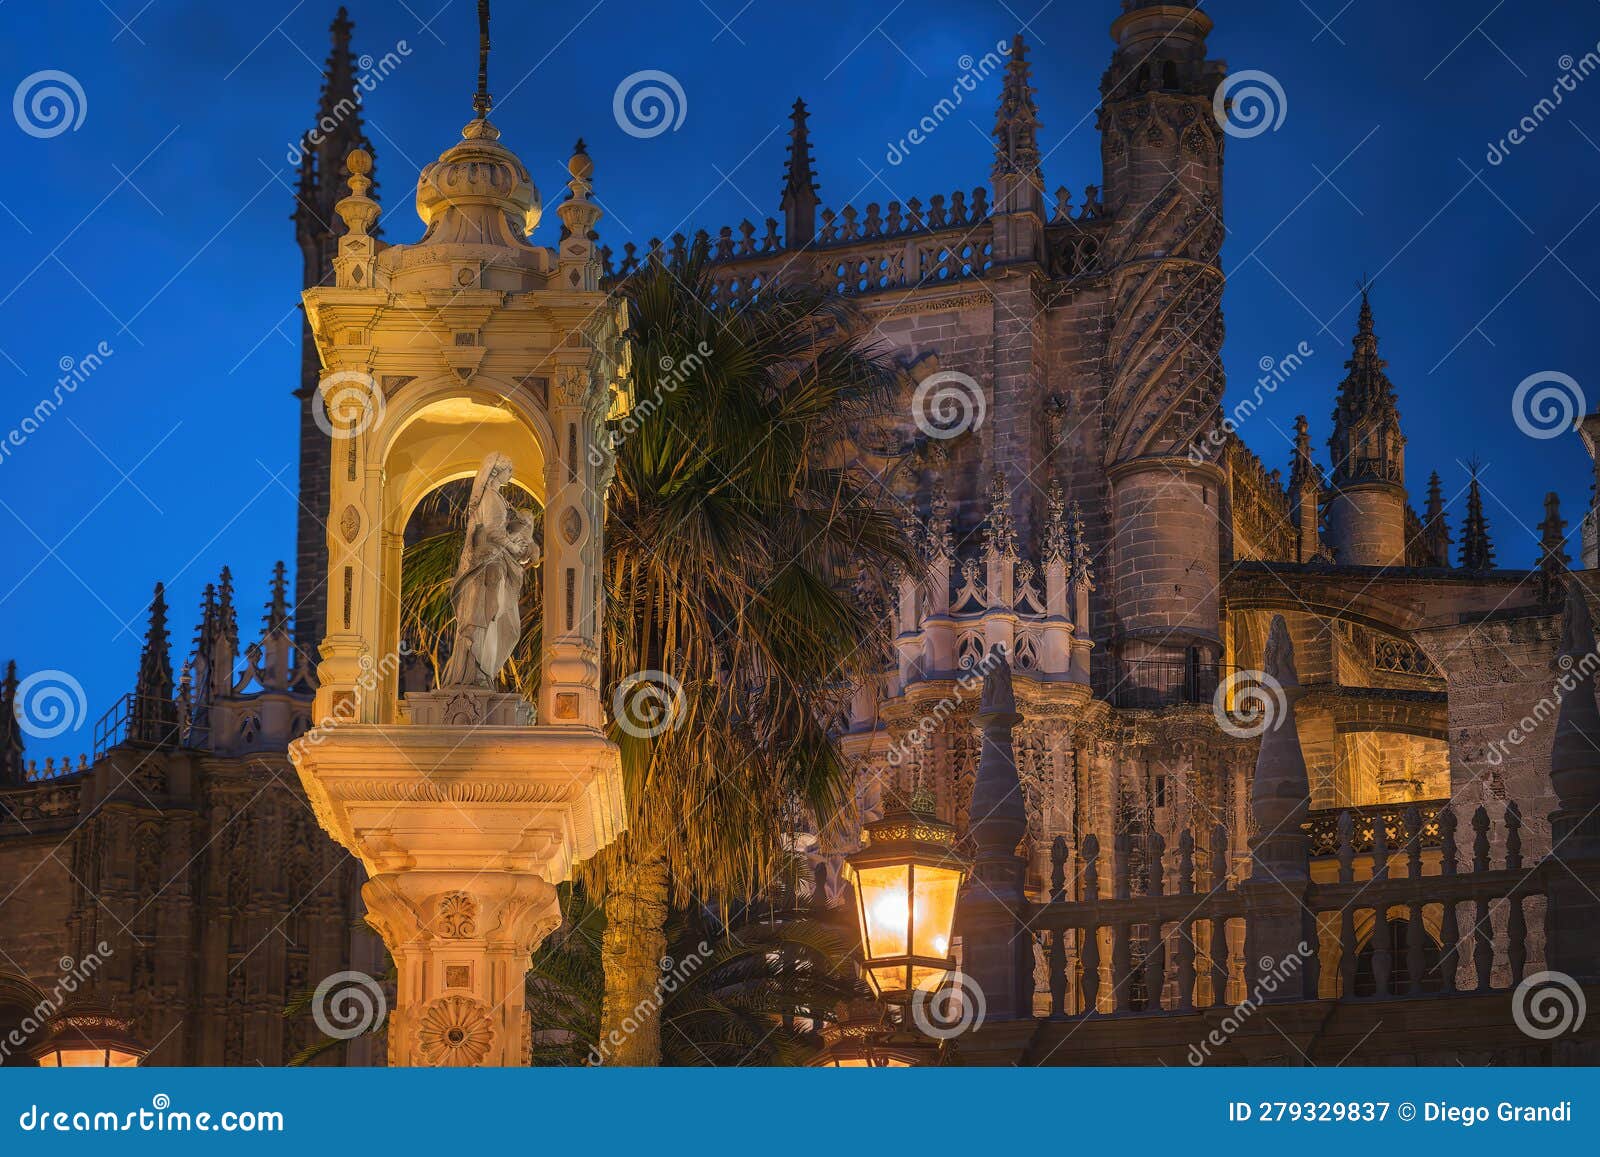 temple of triumph of our lady of patronage at plaza del triunfo square at night - seville, spain